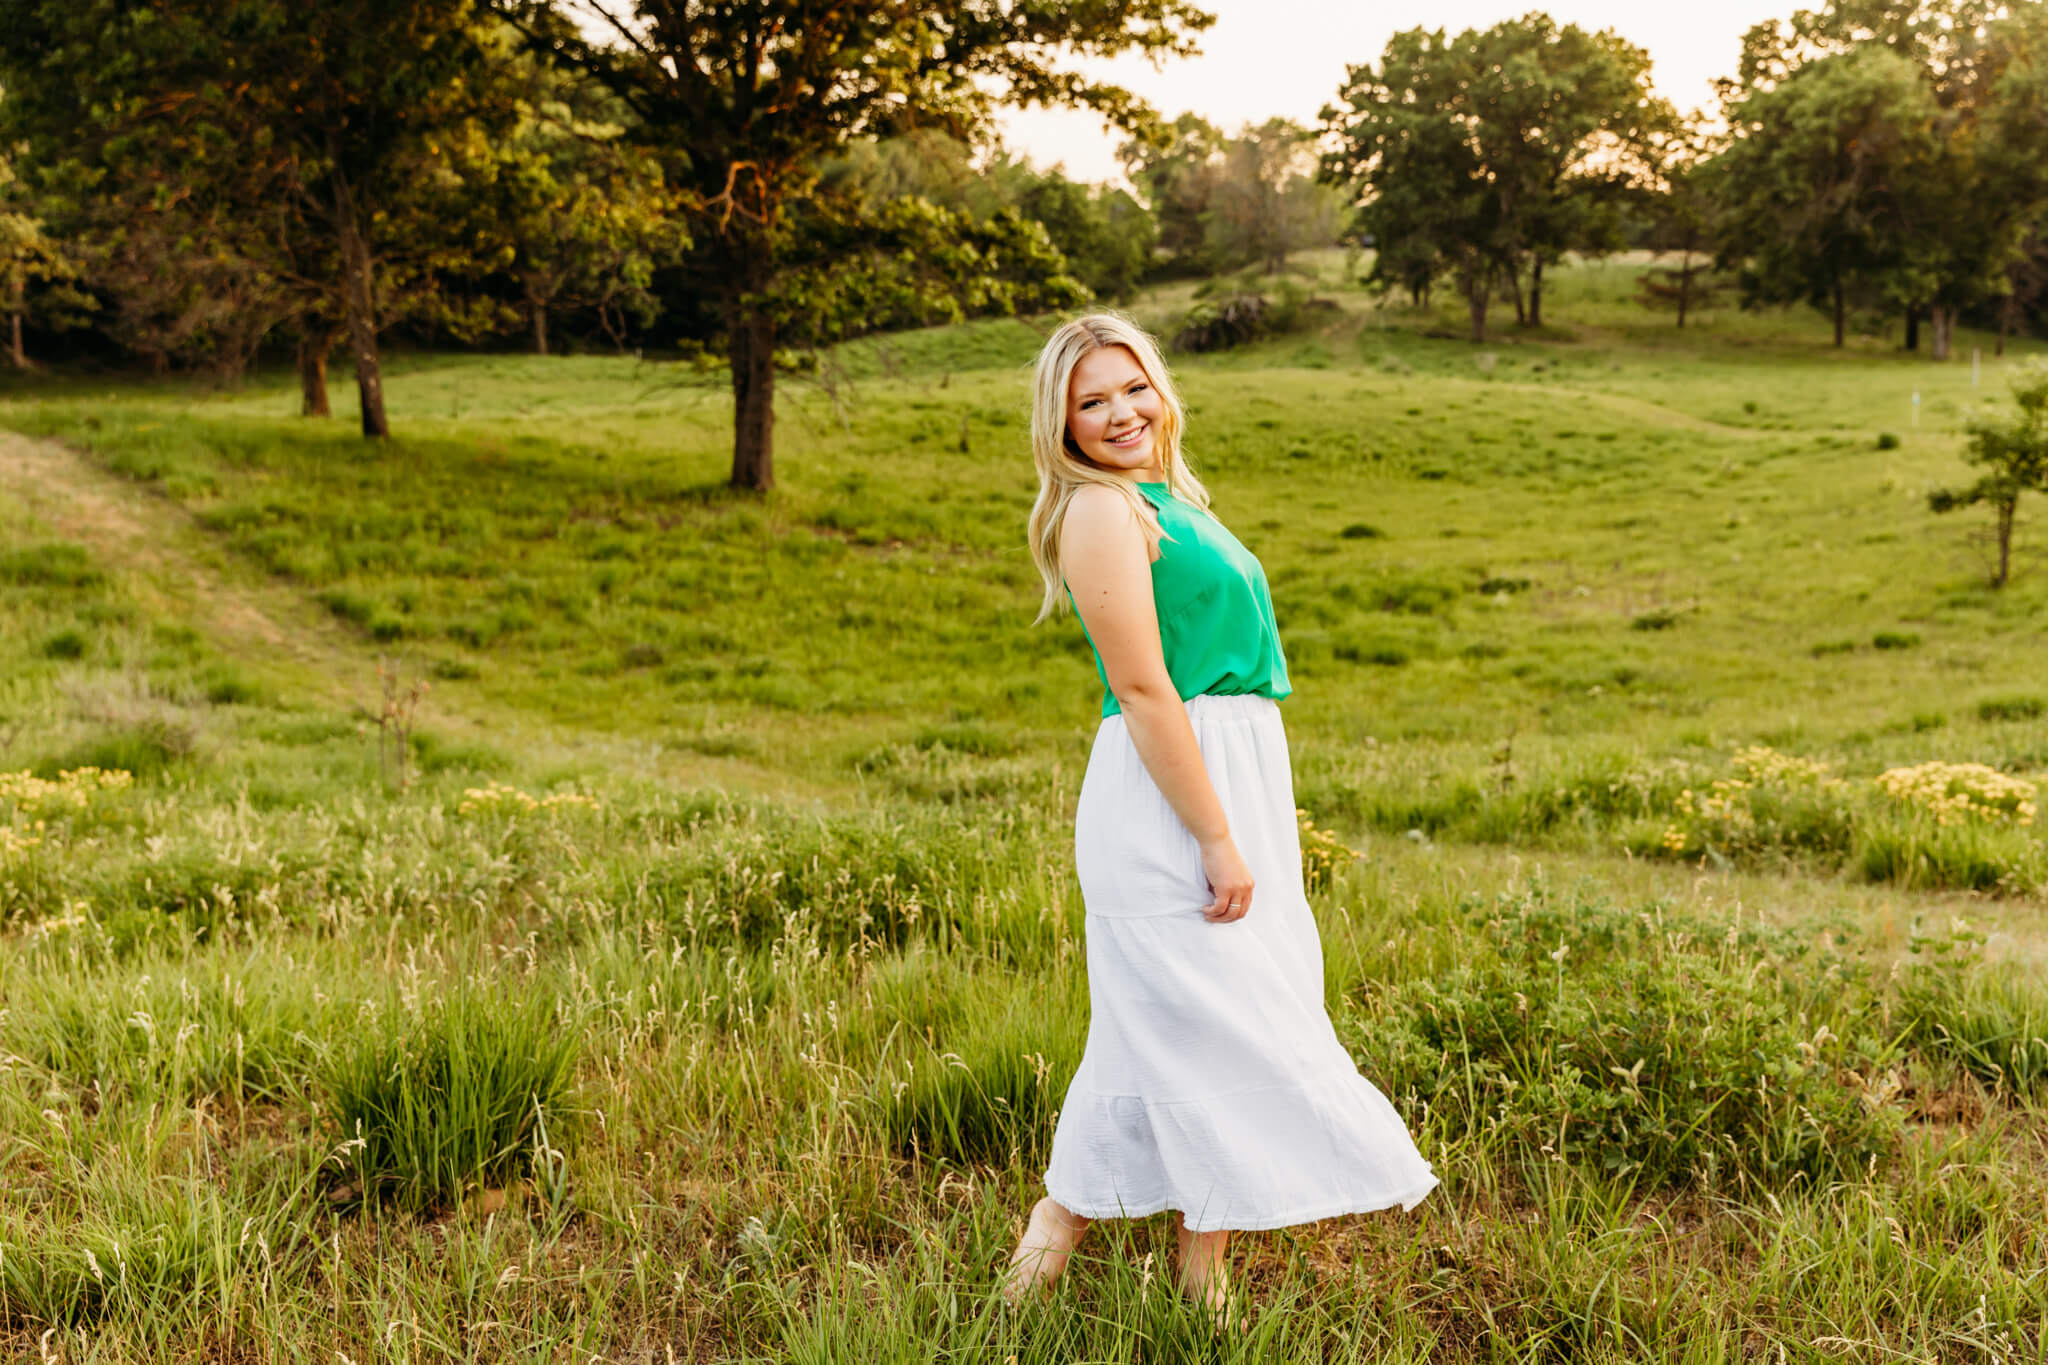 blonde teenager in a white skirt and green top dancing in a field near Oshkosh